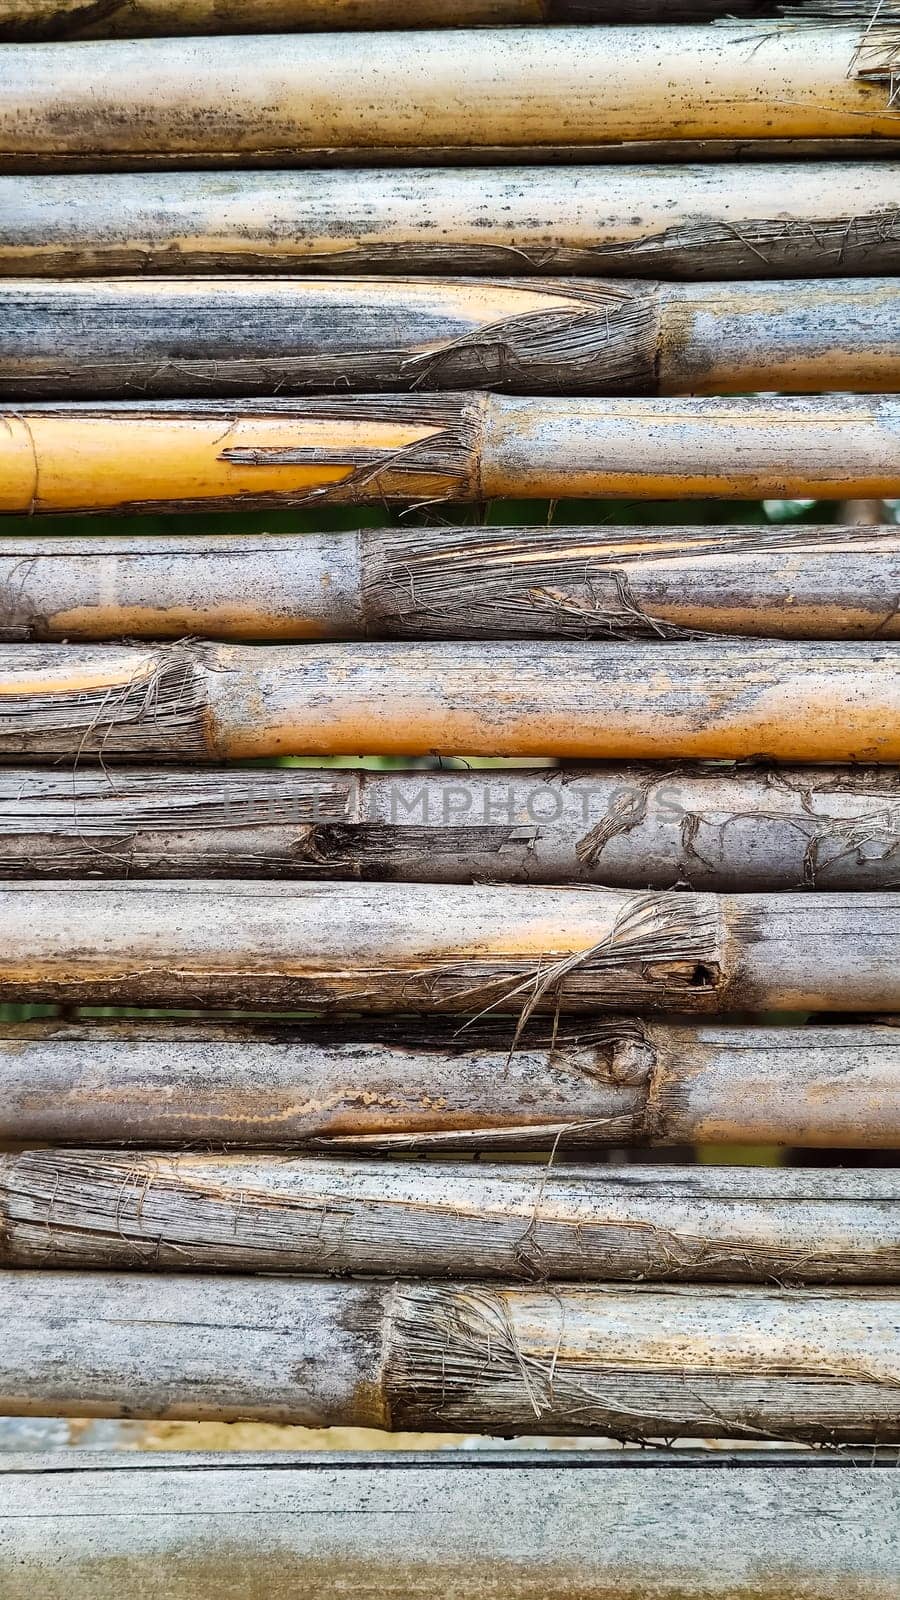 Background texture of dry reed cane. Flat lay, vertical frame, close-up